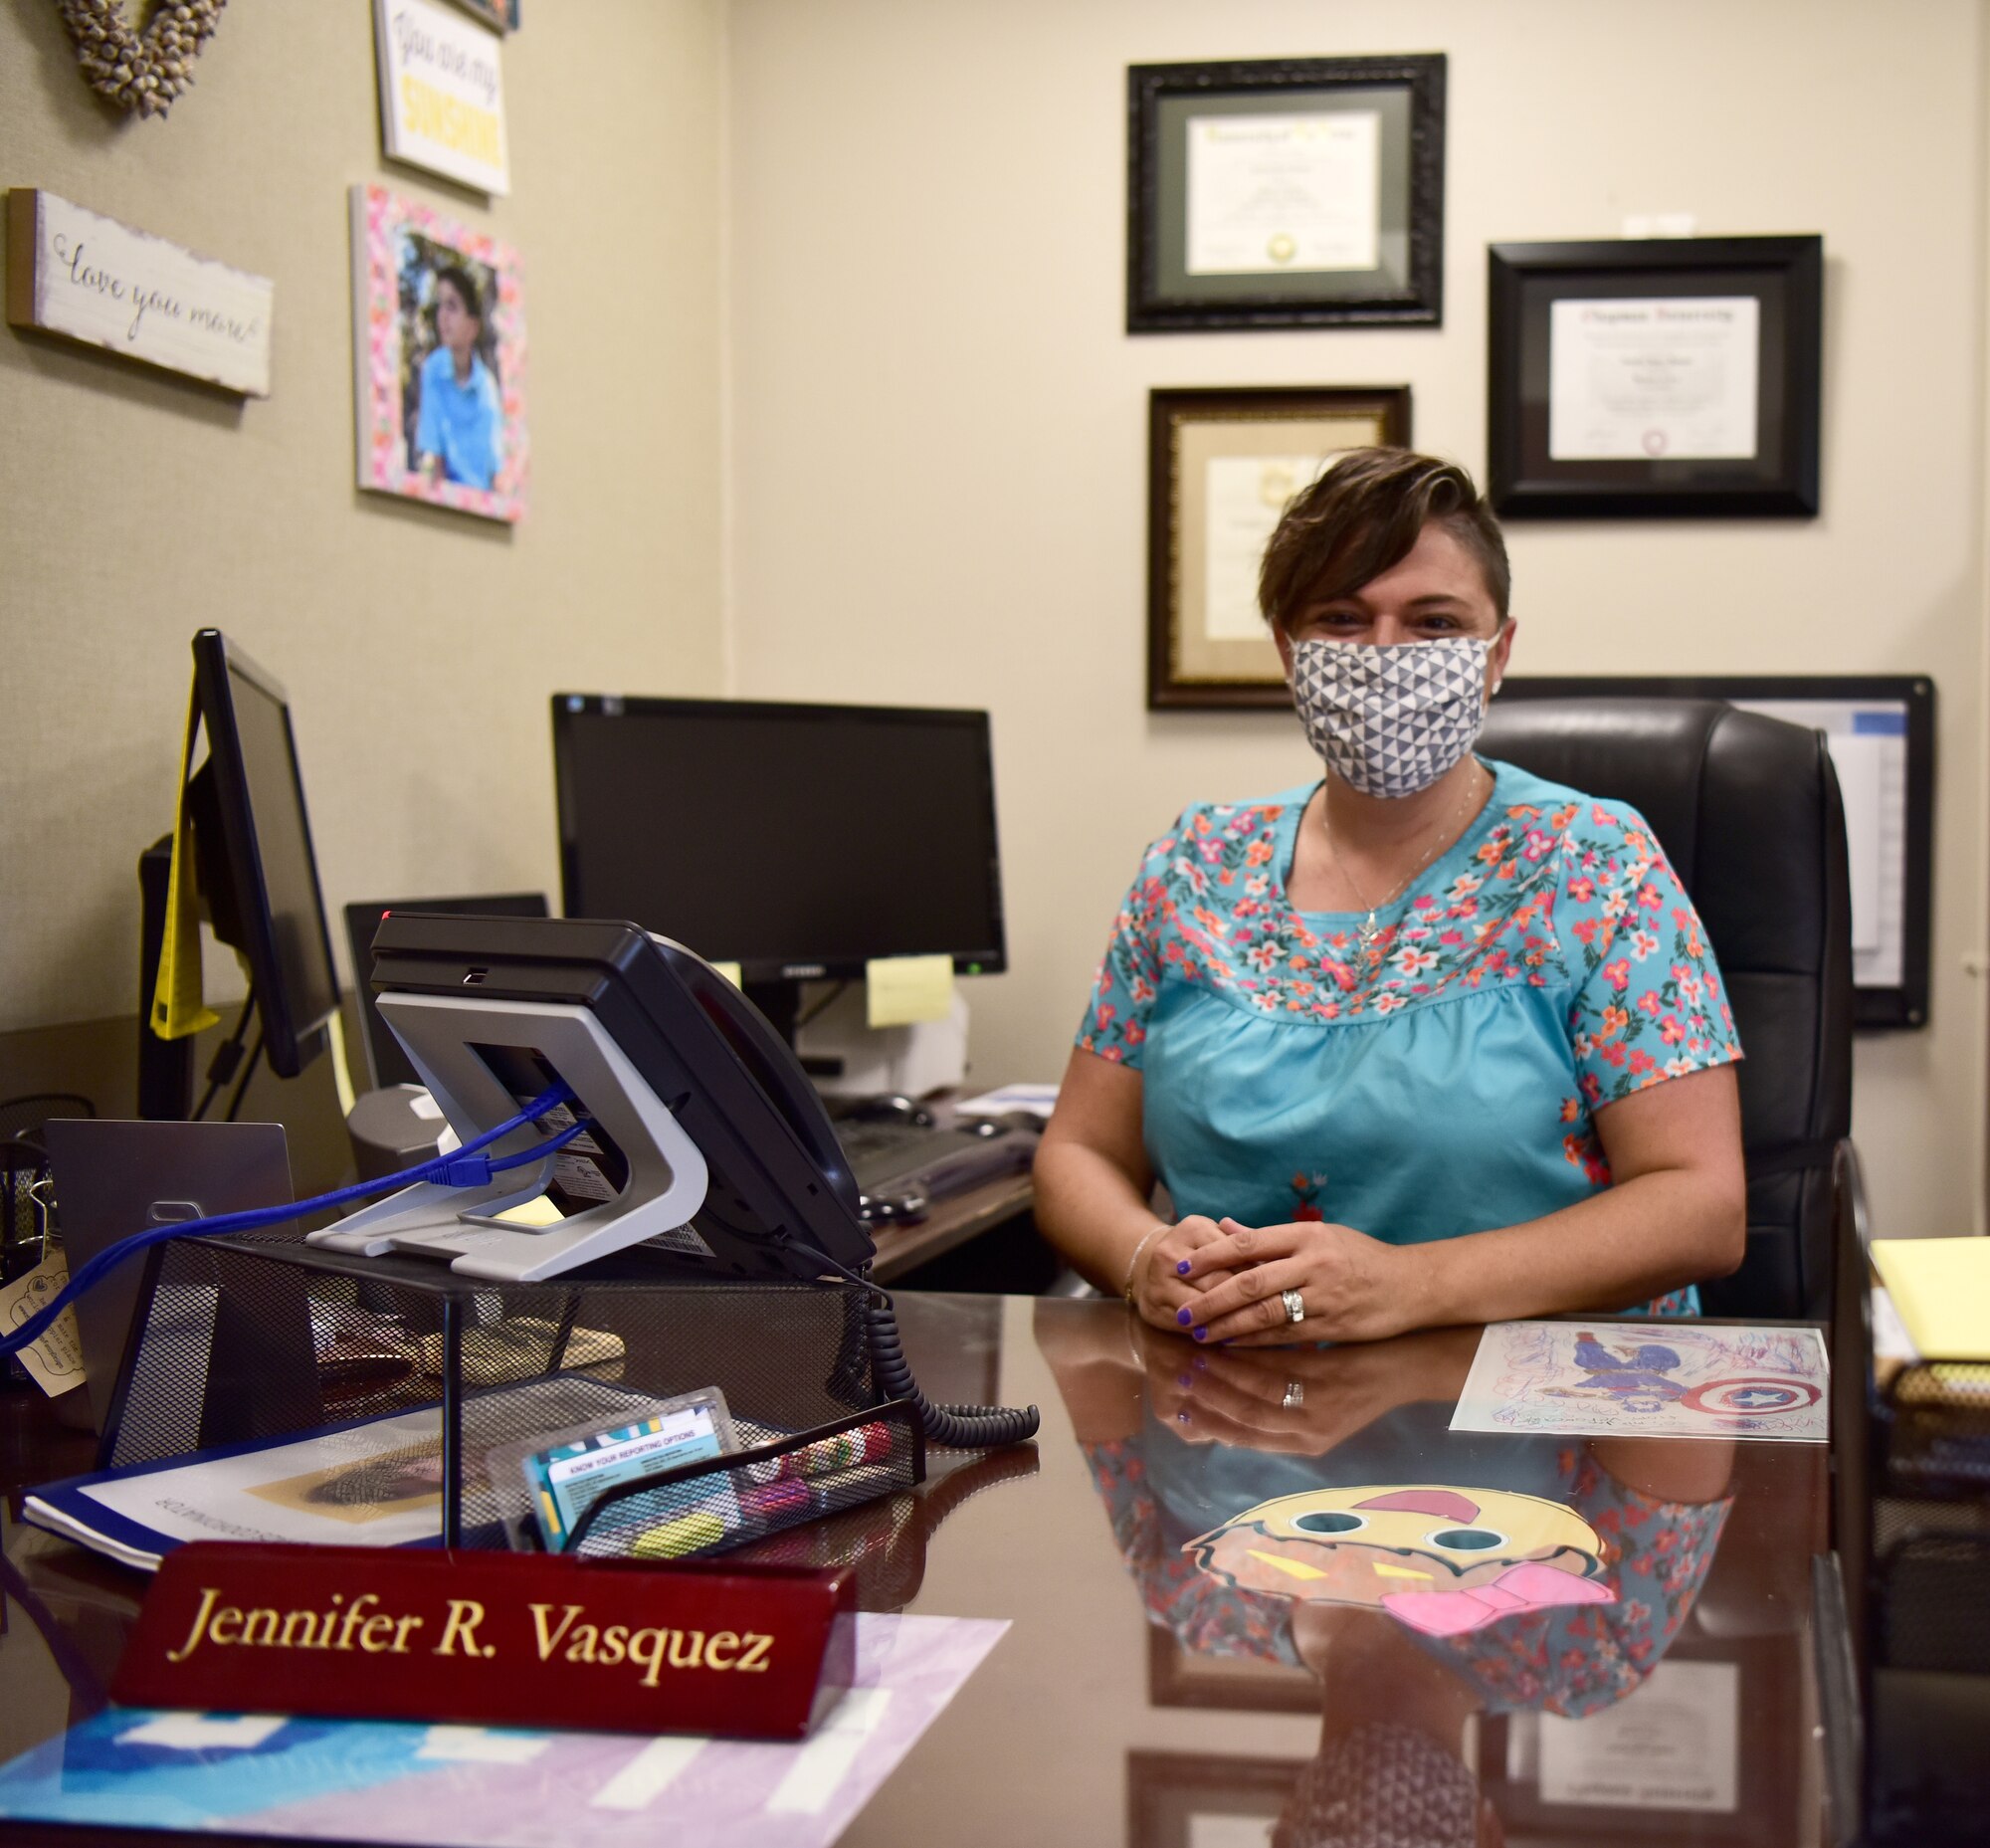 Mrs. Jennifer R. Vasquez, Victim Awareness Assistance Program Coordinator at Space Launch Delta 30 on Vandenberg Space Force Base, sits at her desk August 18, 2021. Vasquez explained her daily work schedule with her co-workers and clients that come to her for legal help. (U.S. Space Force photo by Airman First Class Tiarra Sibley)